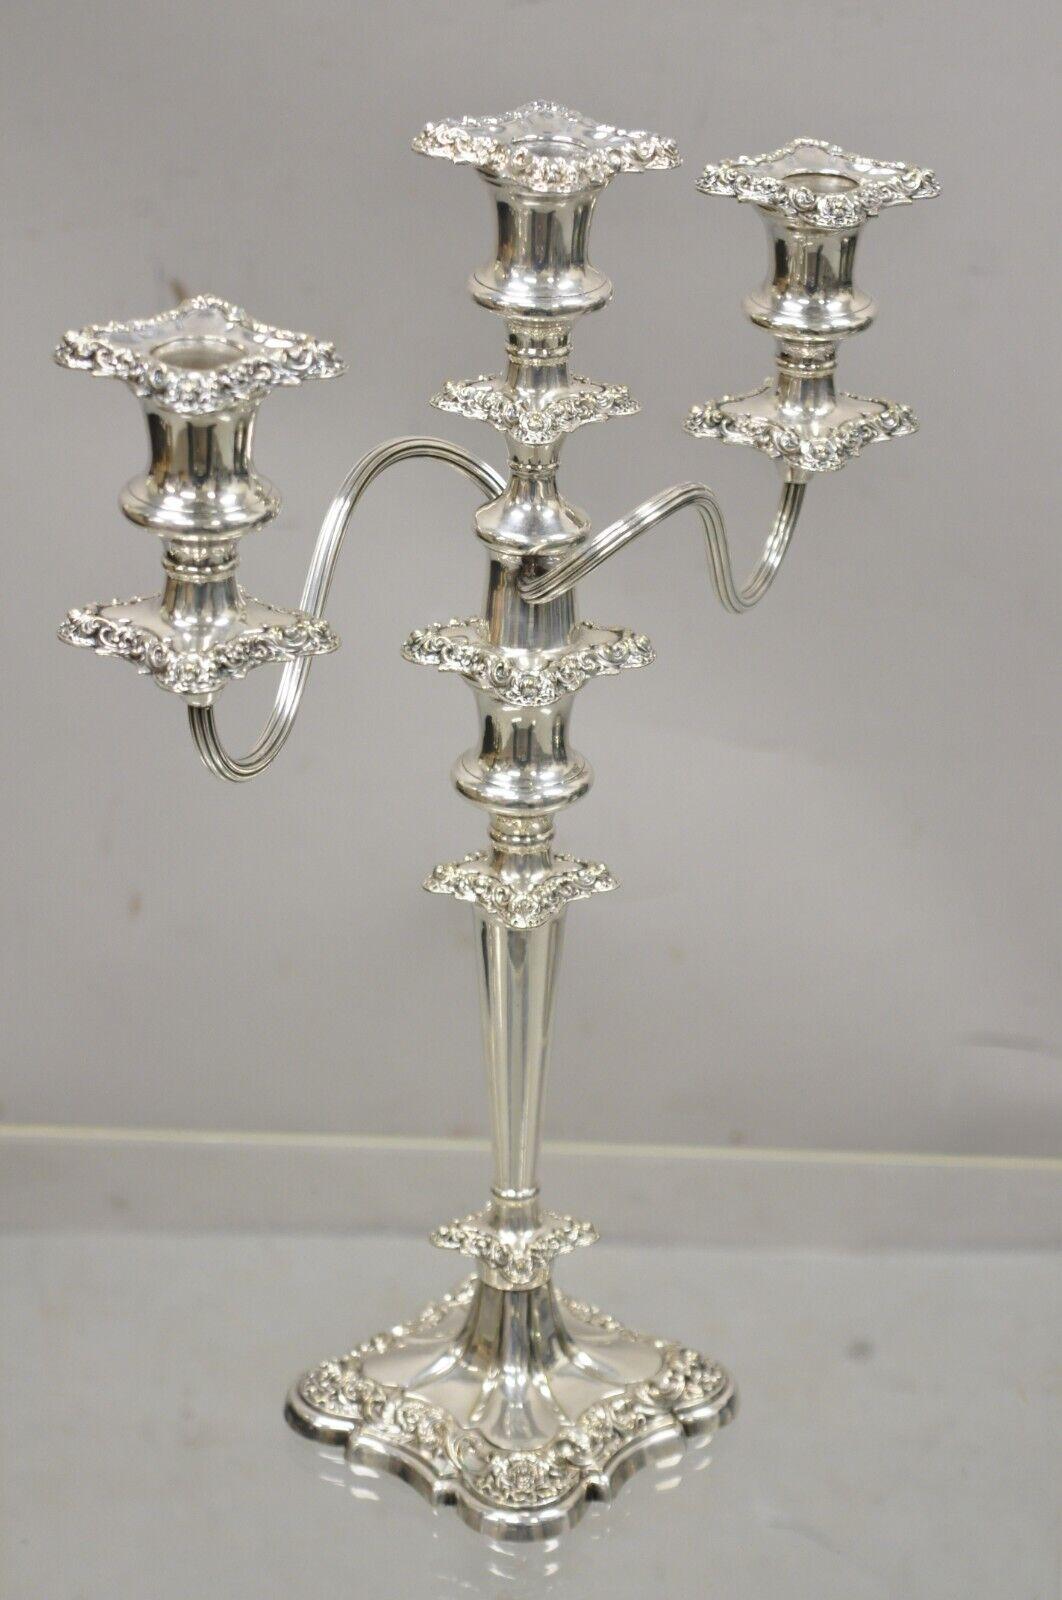 Antique Gorham floral repousse Victorian twin arm silver plated candlestick candelabra. Item features 2 scrolling arms, central candle holder, (3) candle holders in total, 3 removable ornate inserts, 2 part construction, original stamp, very nice